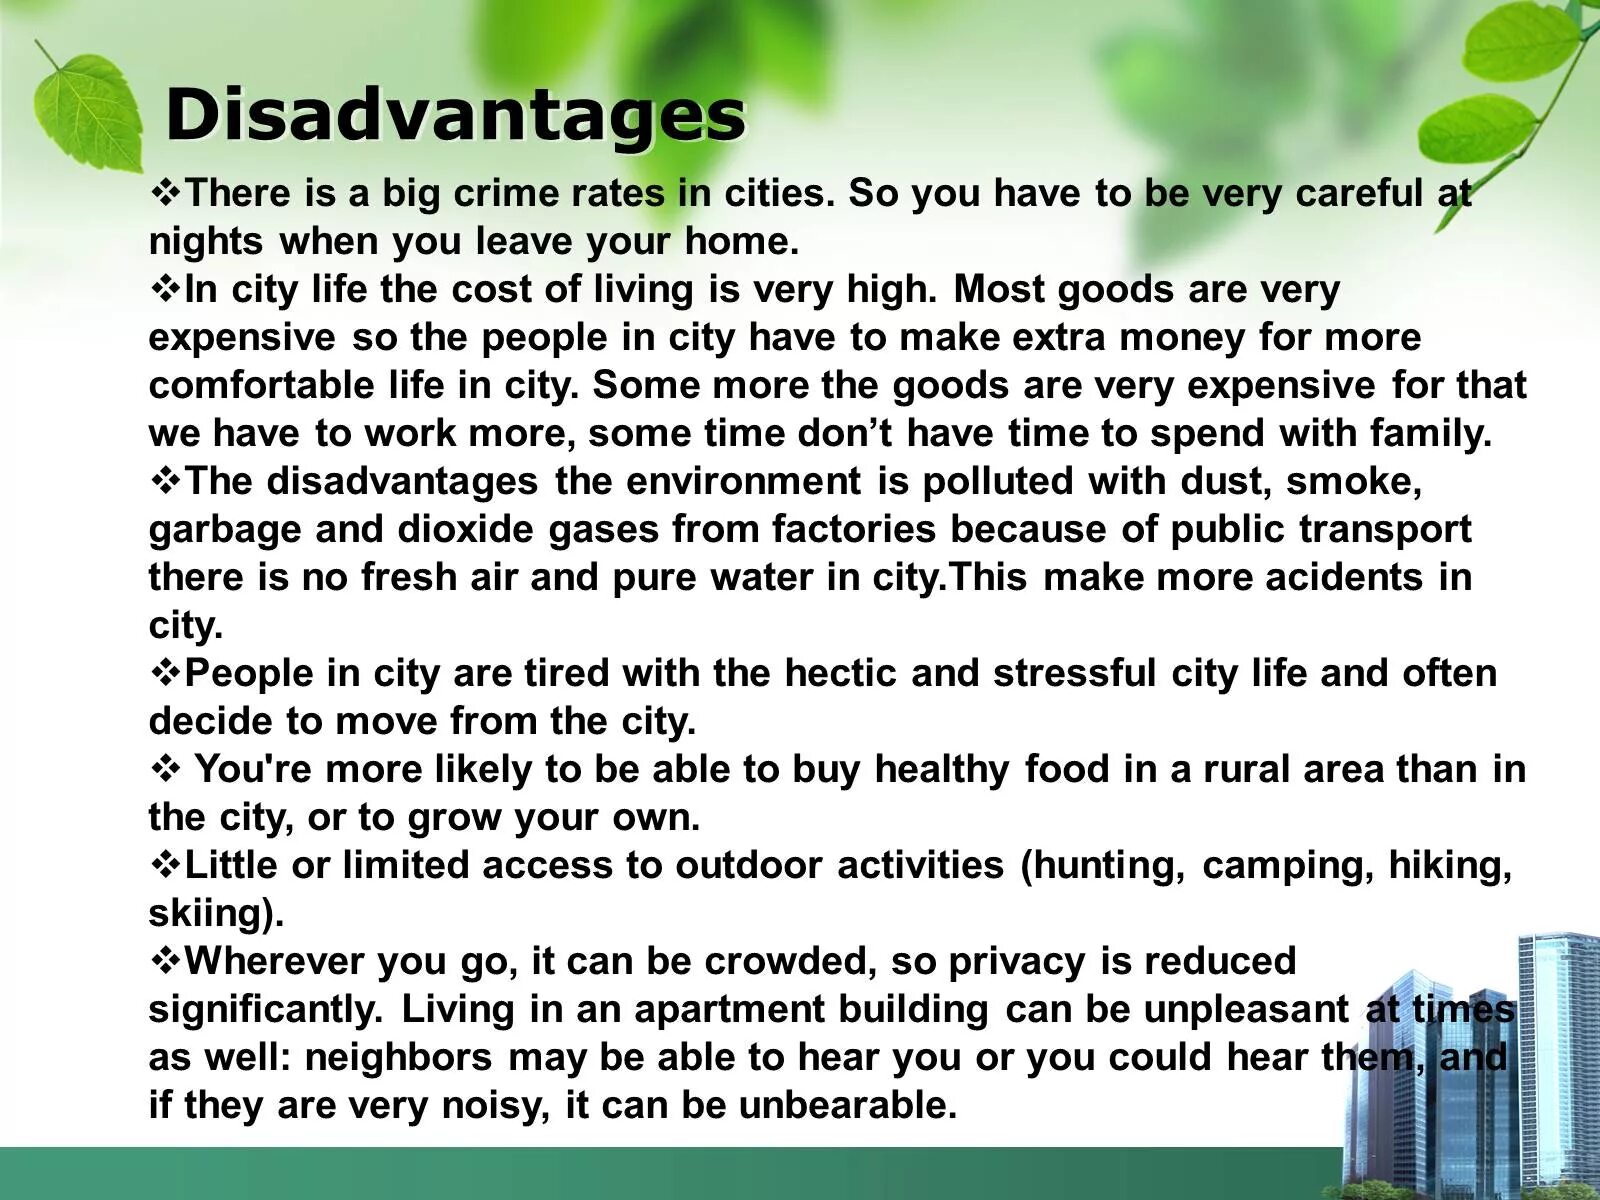 Advantages of living in the countryside. City Life advantages and disadvantages. Темы для эссе по английскому advantages and disadvantages. Темы эссе advantages and disadvantages. Disadvantages of Living in the City.